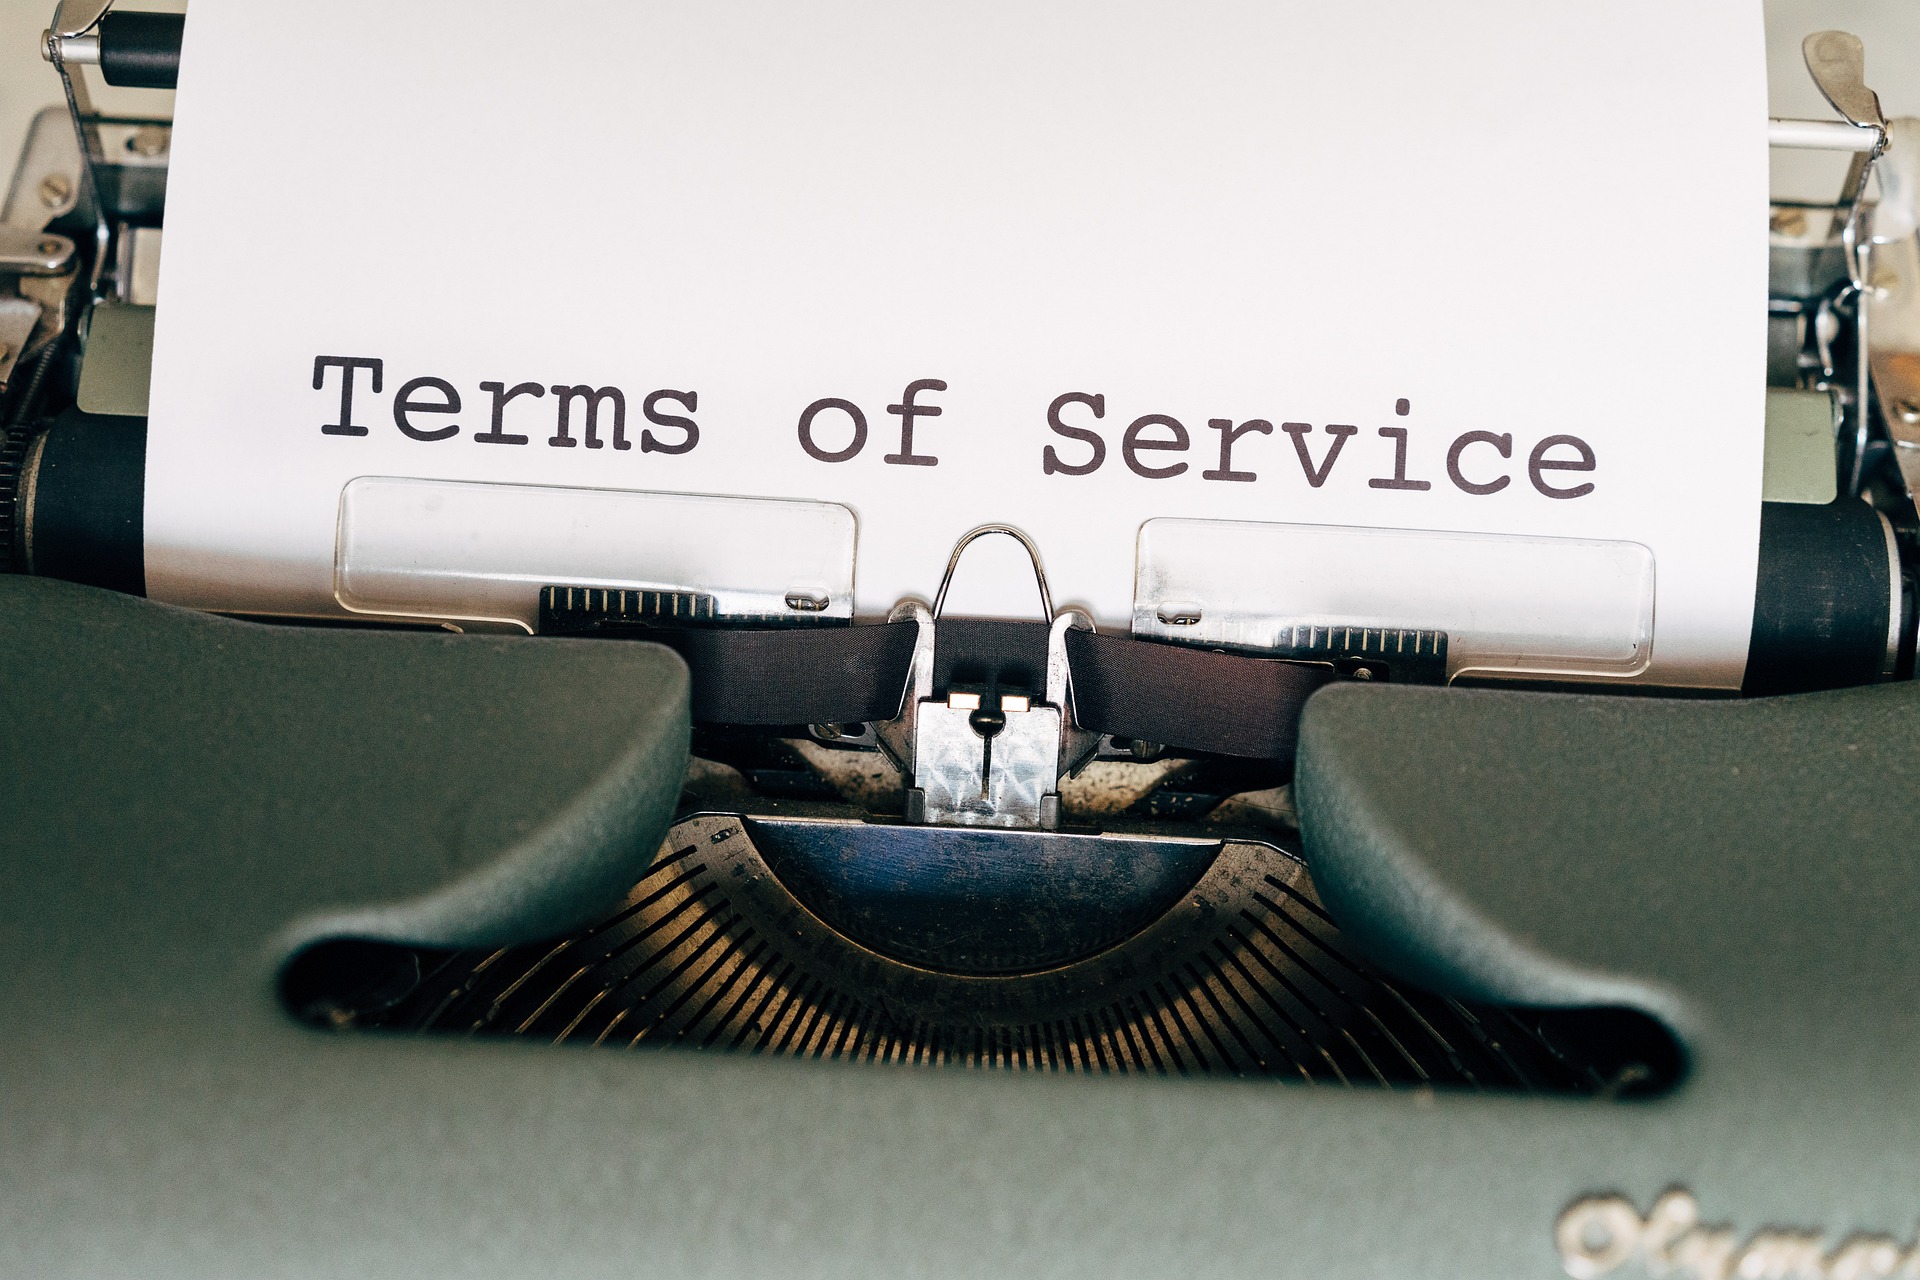 Terms of Service - Business Pedia